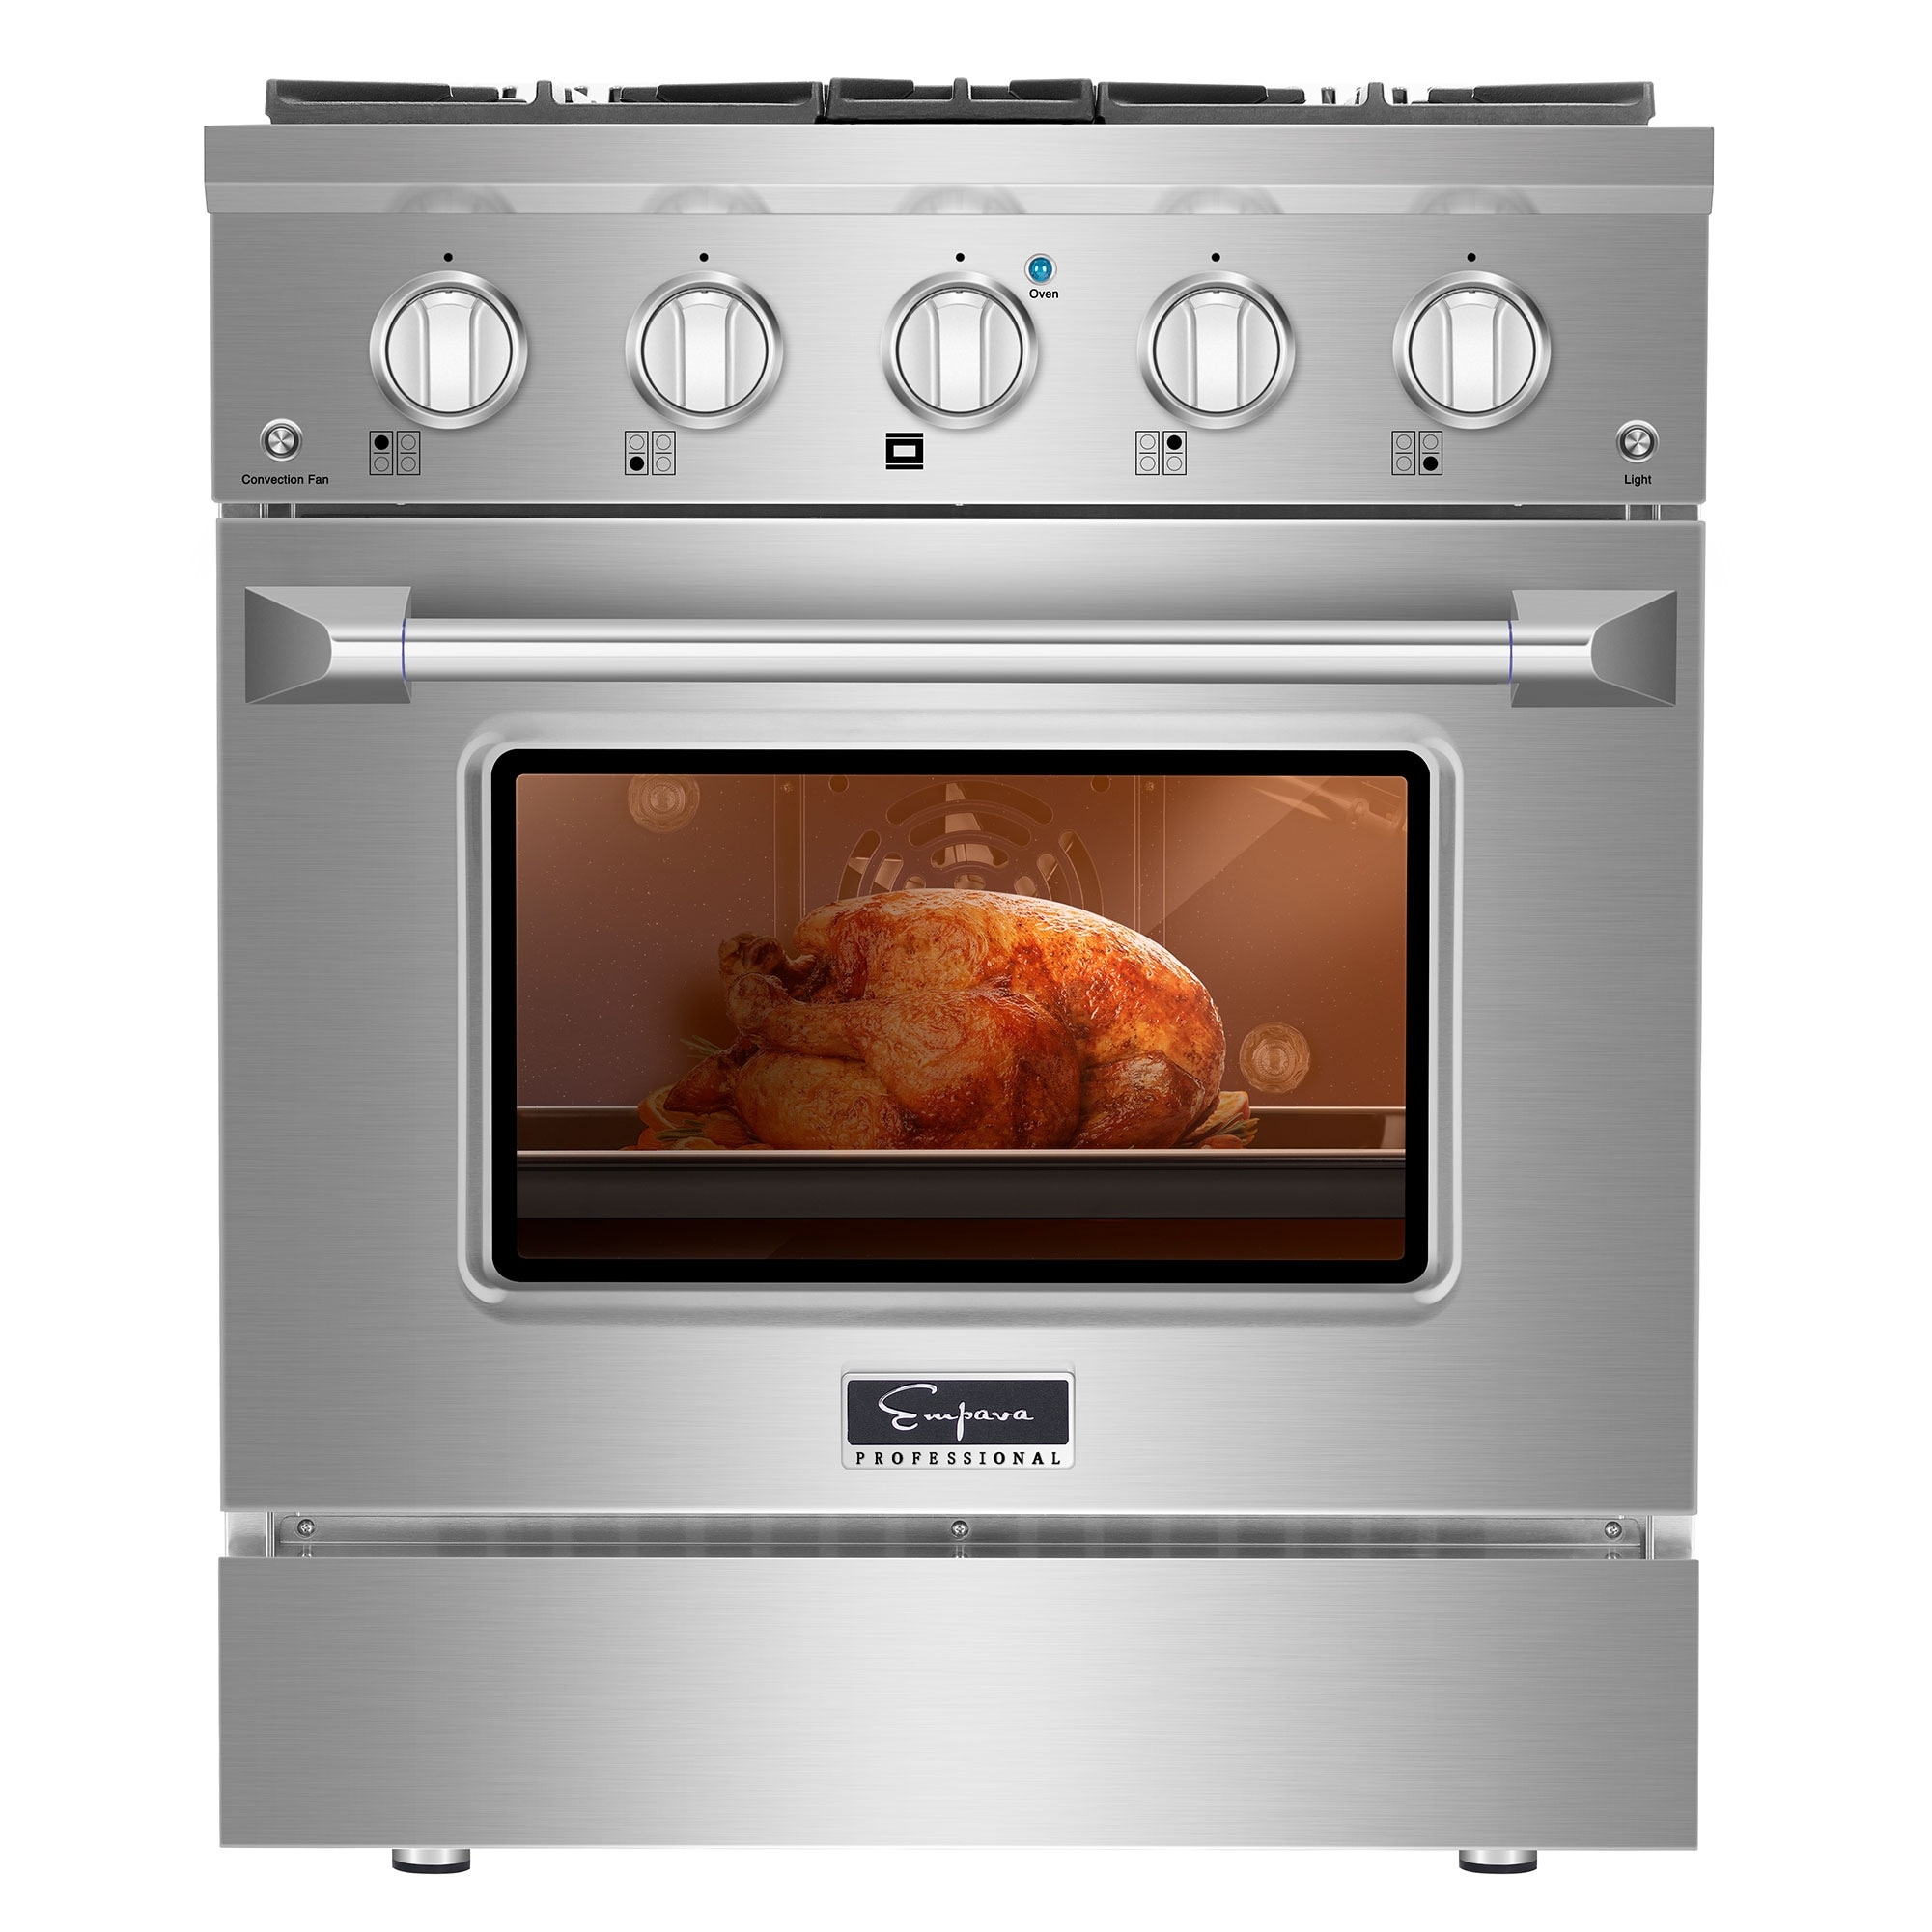 24 Inch Wall Oven & 30 Inch Wall Oven  Empava® Appliances – Empava  Appliances